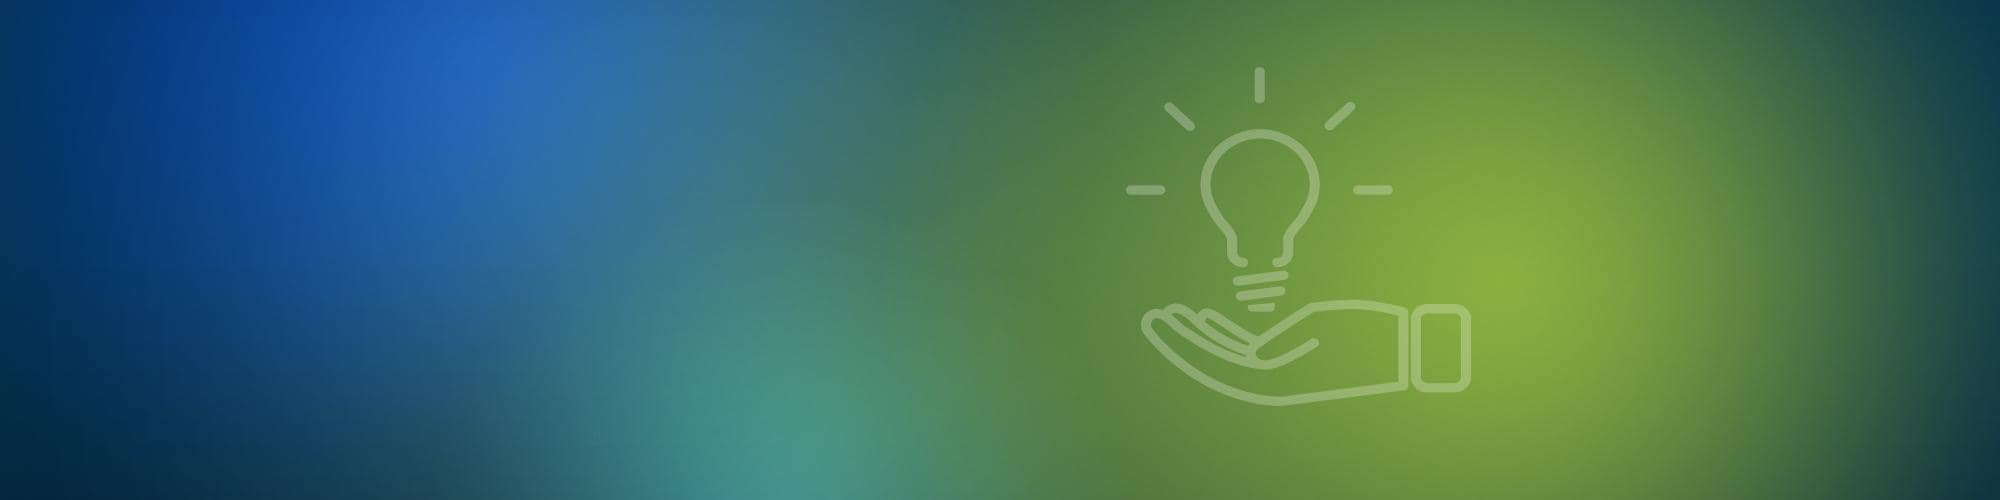 Cobalt, aqua and green background with hand holding lightbulb icon